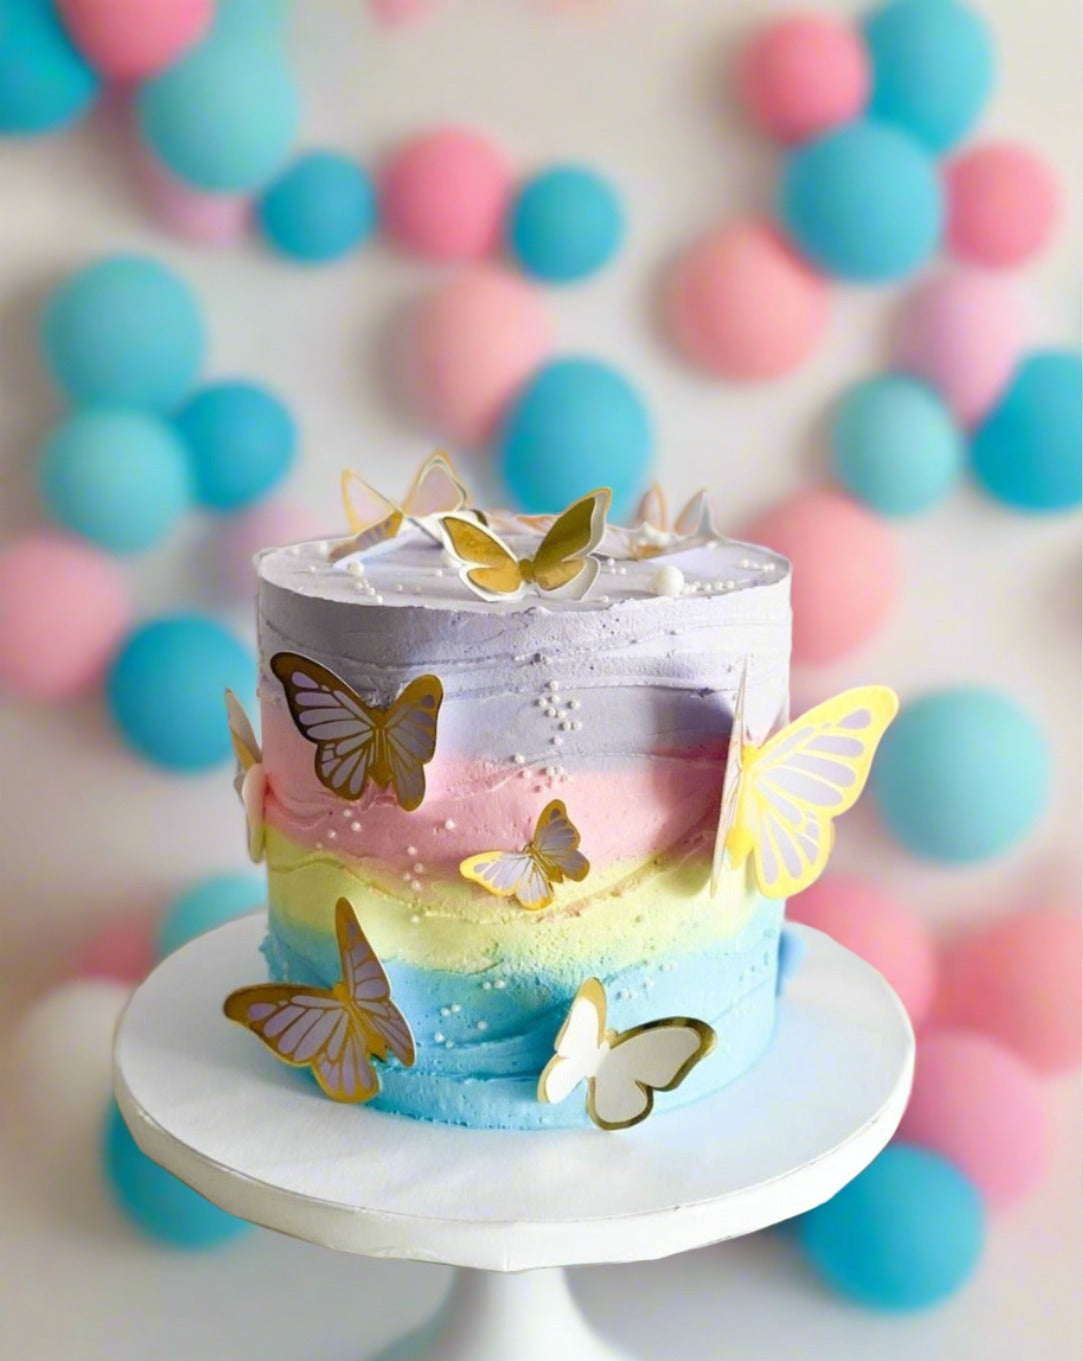 Baby Shower Cakes | Baby Shower Theme Cakes For Boys & Girls | Order Now